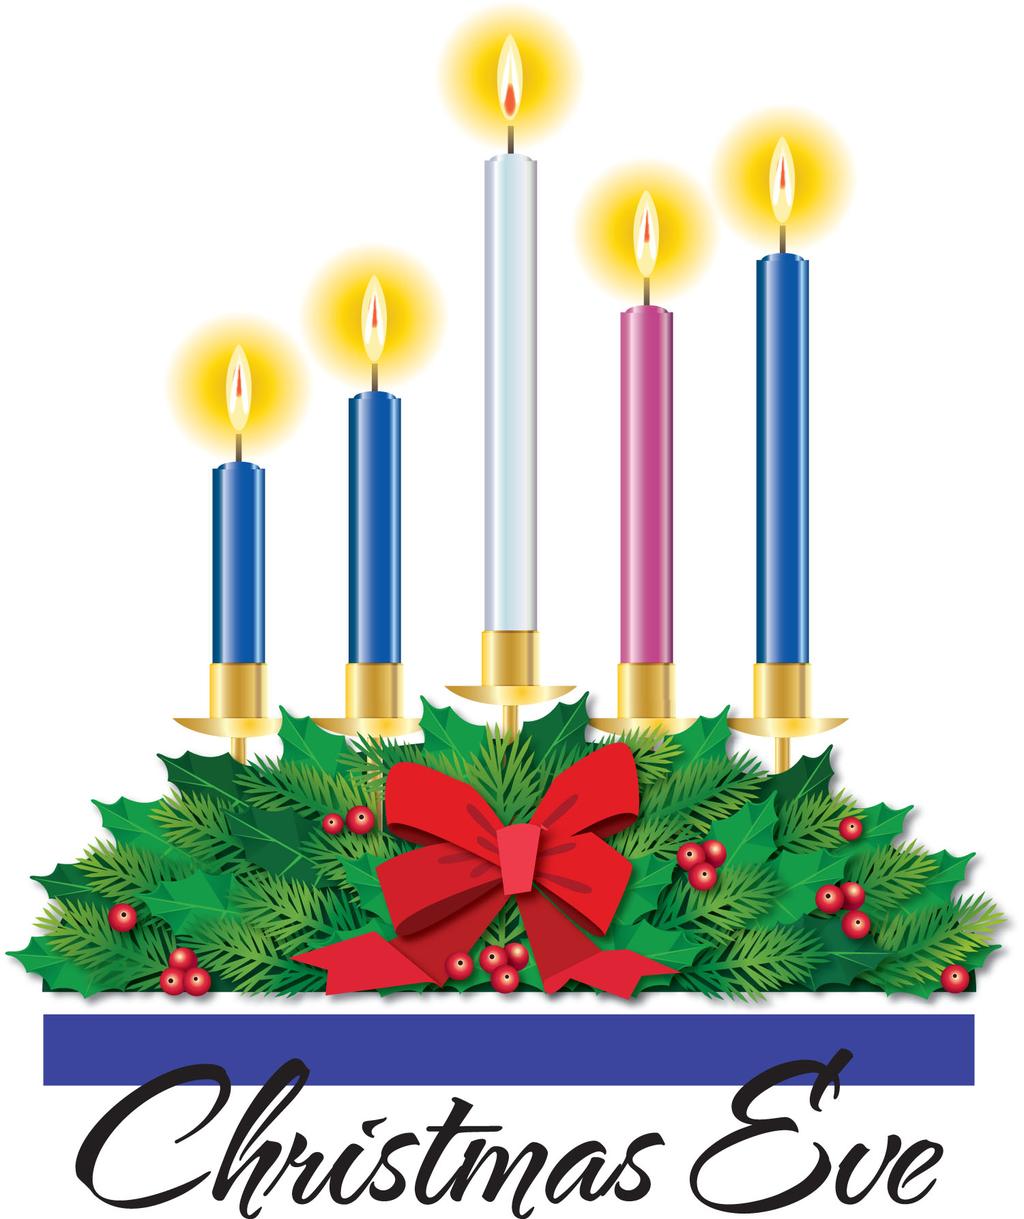 Worship Services 5:00 pm: Children s Nativity Pageant 10:00 pm: Christmas Music 10:30 pm: Candlelight Service First English Evangelical Lutheran Church, 1603 Monument Avenue, Richmond, VA 23220-2906